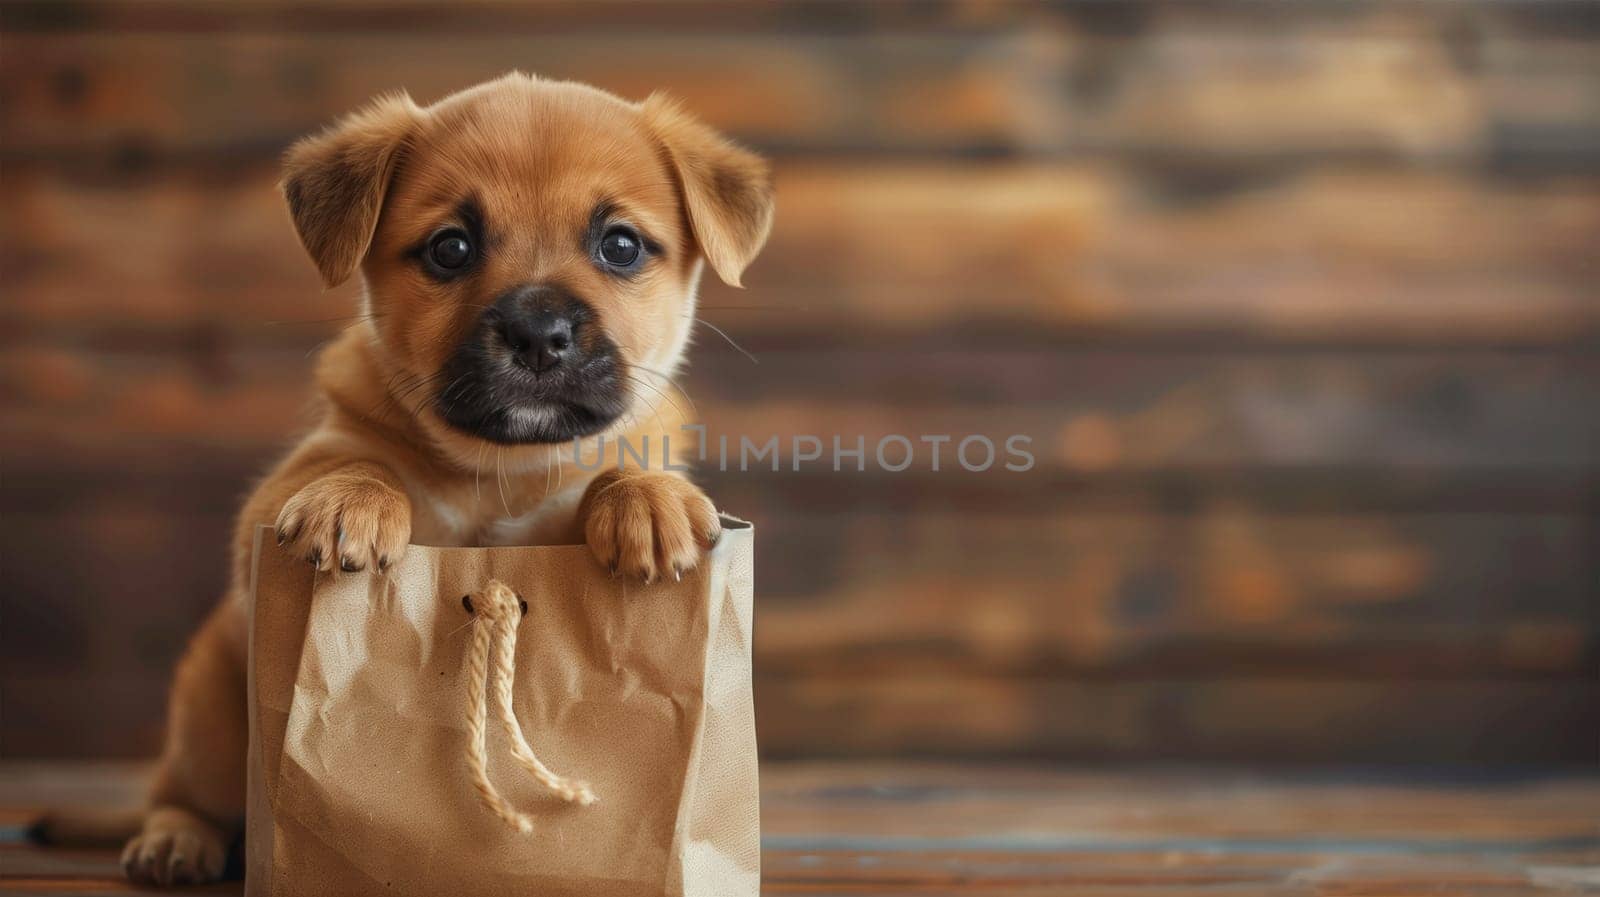 Adorable Puppy Peeks Out of a Gift Bag Celebrating Fathers Day Indoors by Sd28DimoN_1976